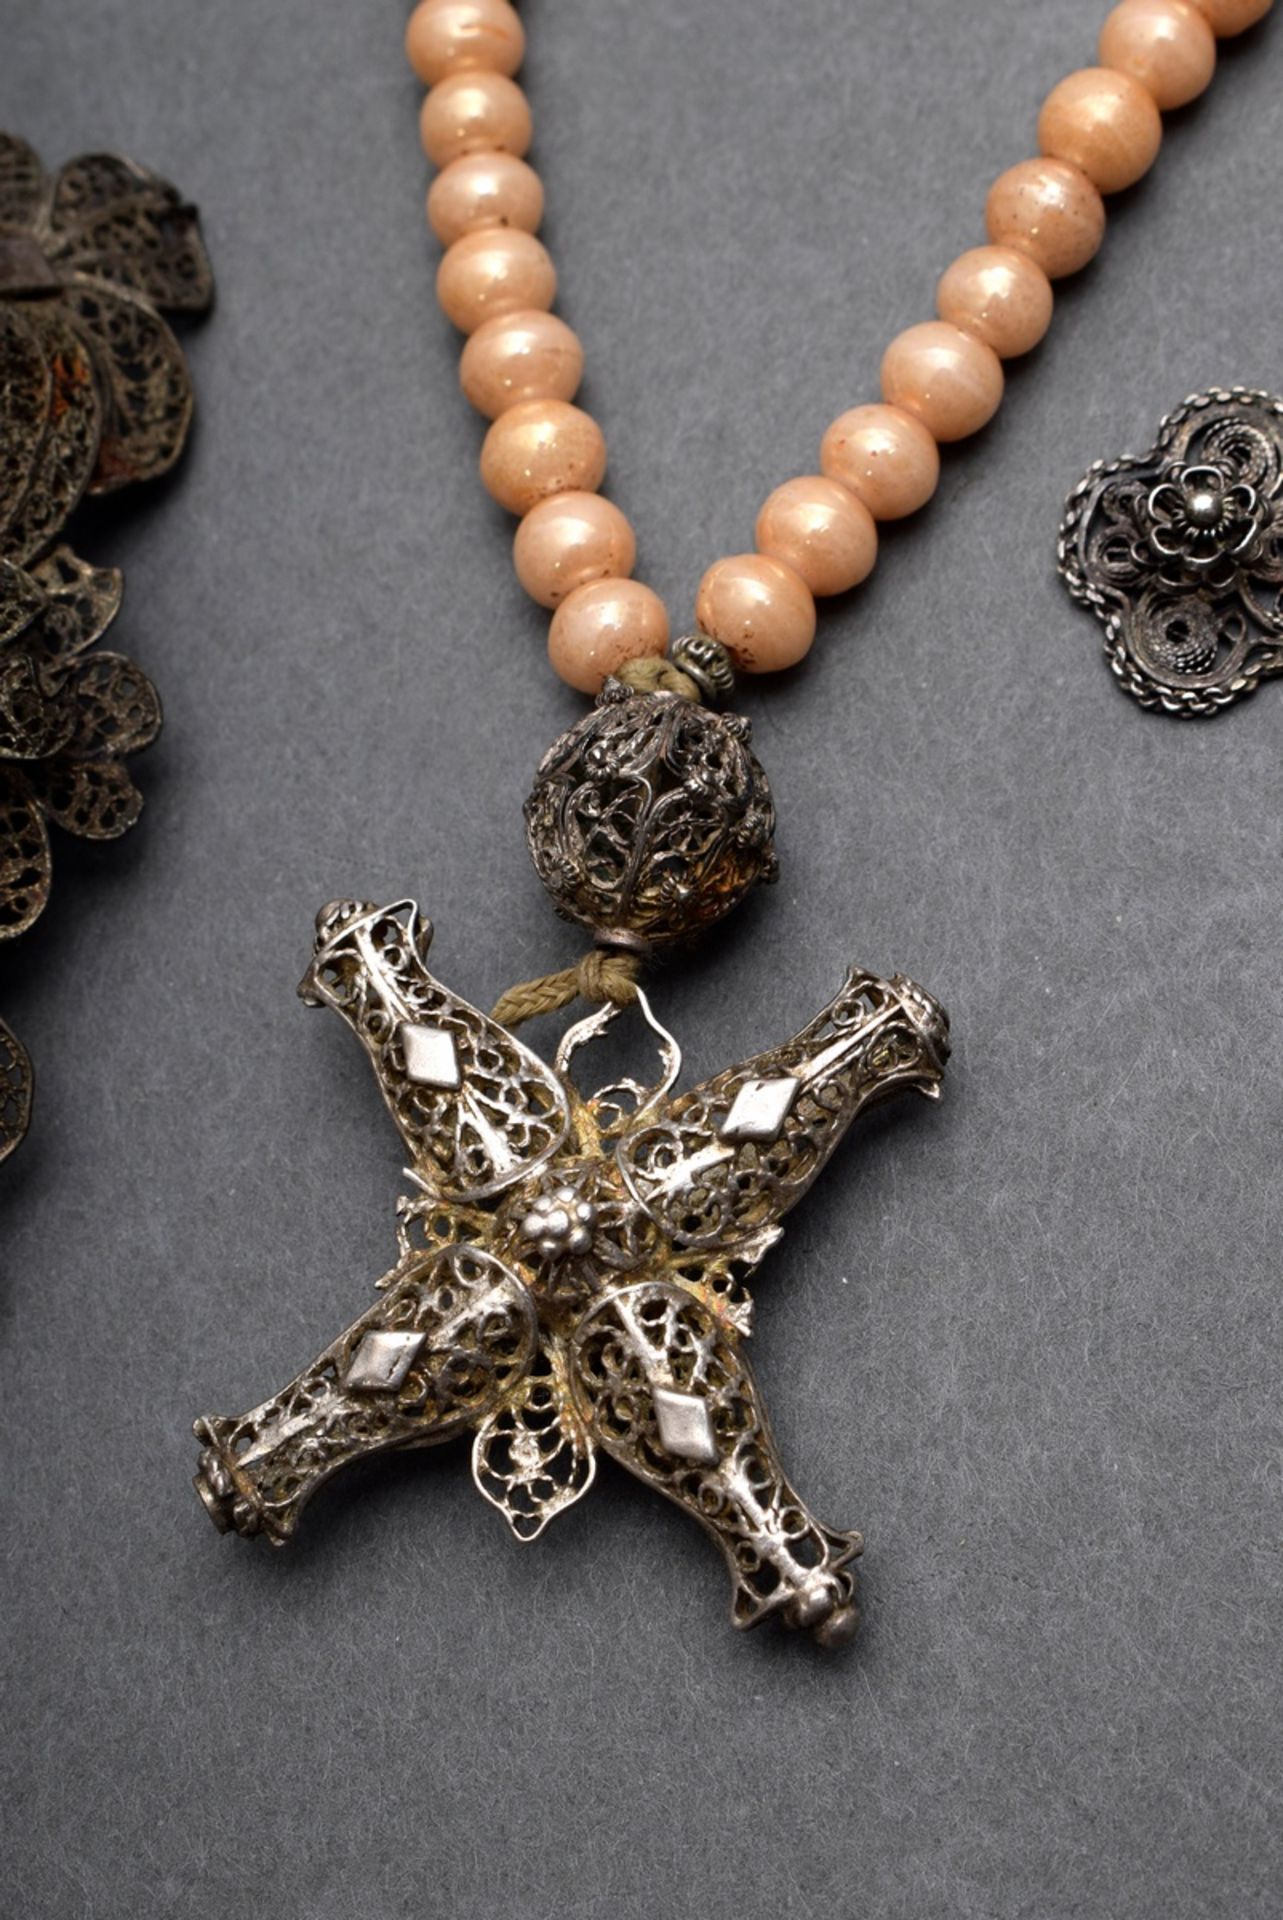 3 Various silver filigree works: Rosary fragment with glass beads (l. 26cm), crucifix (8x6cm) and f - Image 7 of 7